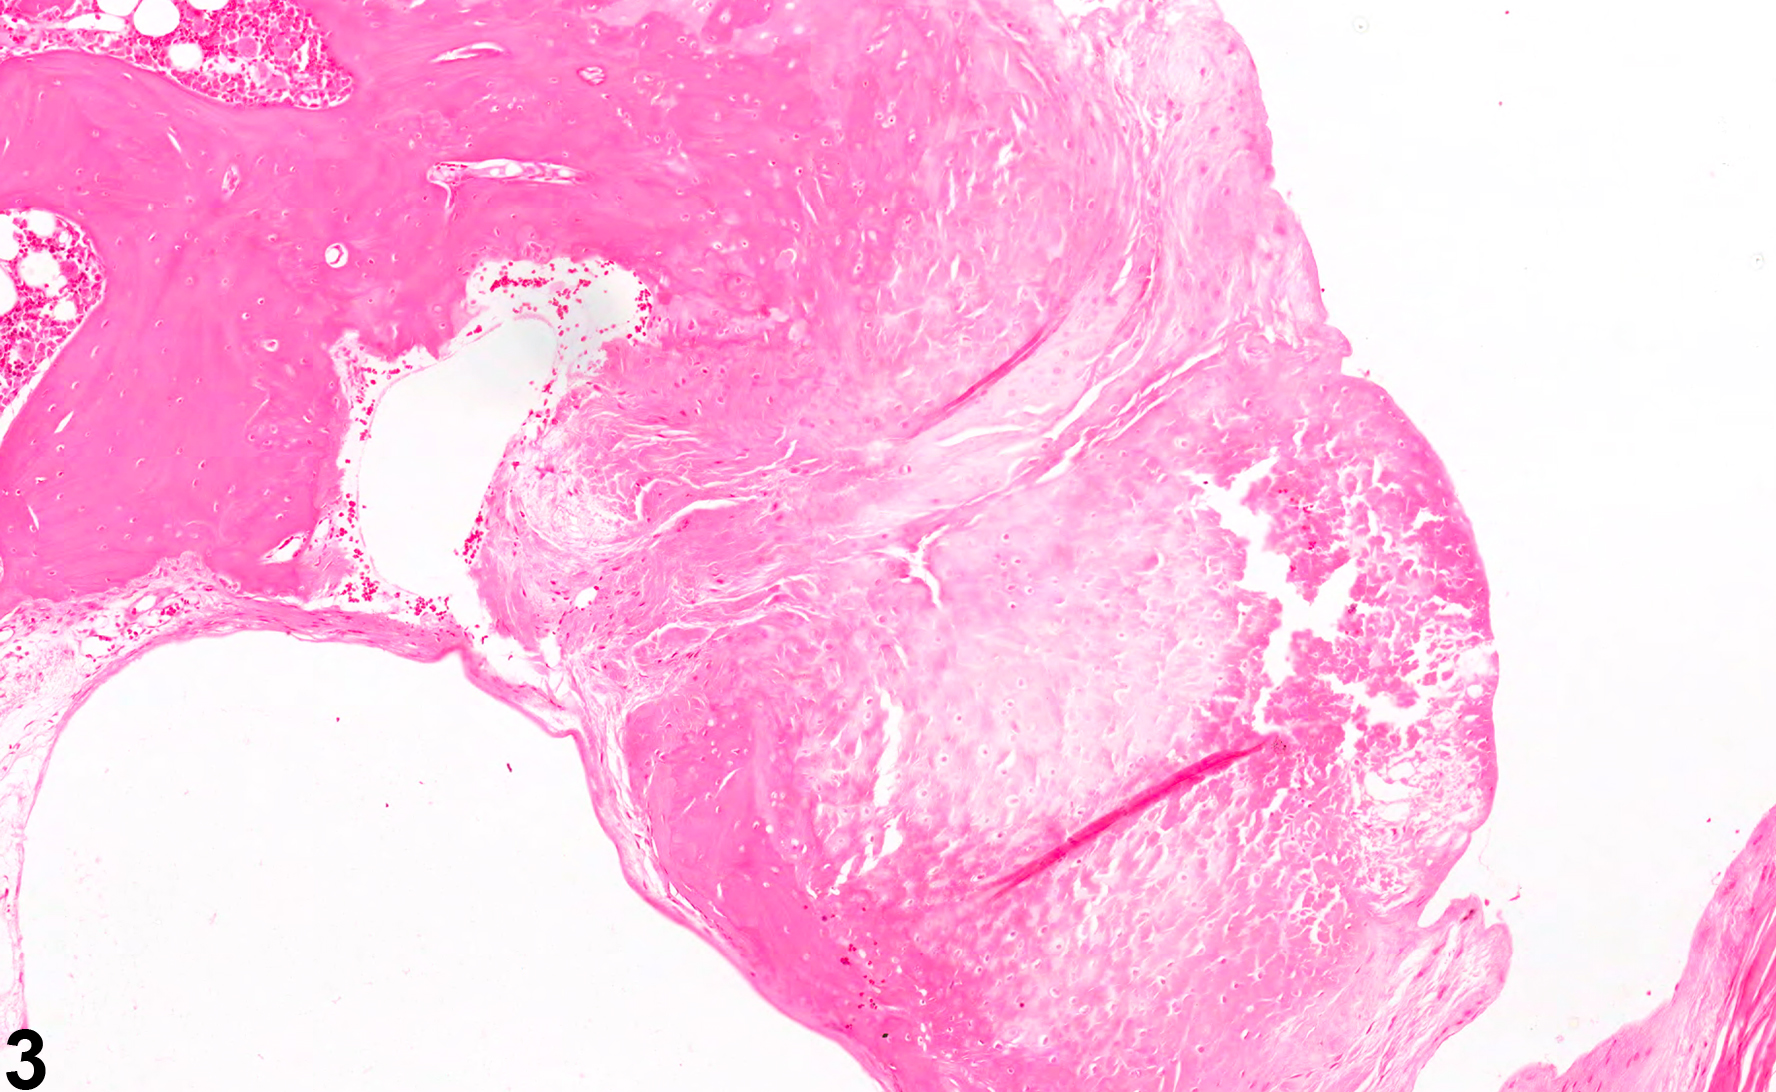 Image of necrosis in the bone from a male F344/N rat in a chronic study